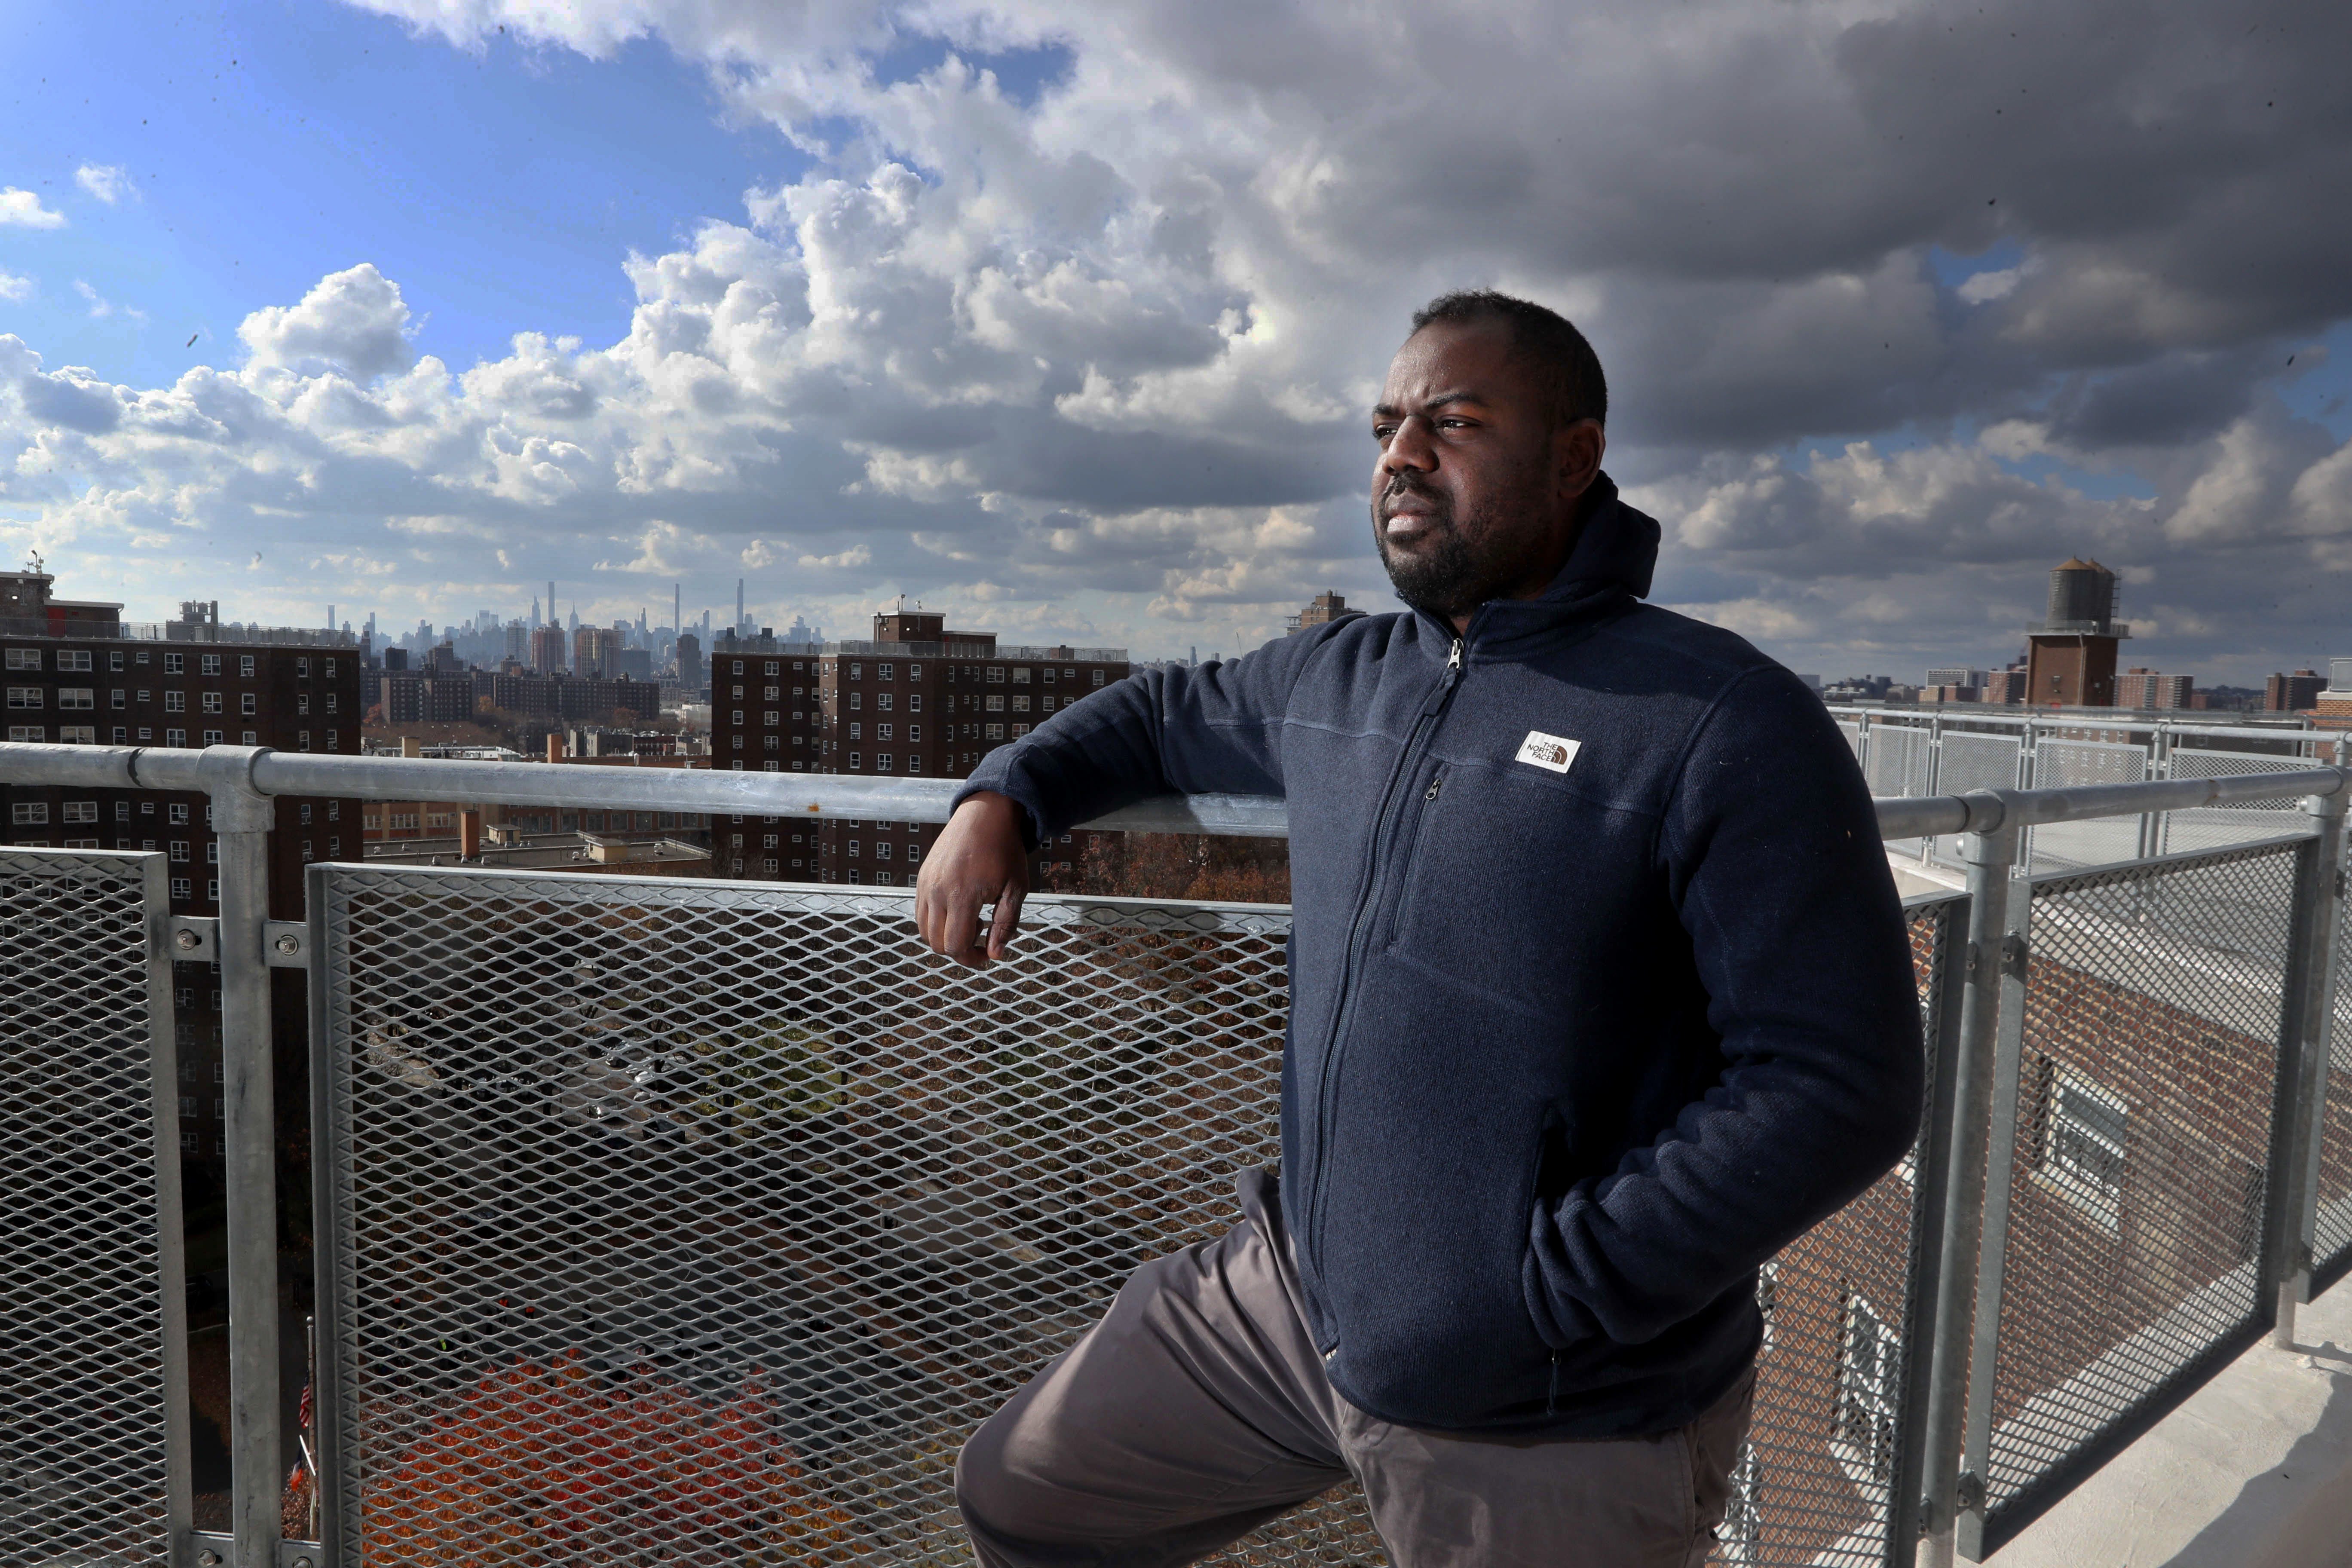 Donnel Baird, CEO of BlocPower, on the rooftop of one of the apartment buildings at the Melrose Houses, a public housing apartment complex in the Bronx, New York Nov. 29, 2021. Baird is one of the co-founders of BlocPower, a company that is installing 'mesh networking' transmitters on the rooftops of multifamily high-rises, churches, and schools throughout the South Bronx in order to bring affordable internet access to populations that are underserved by major internet service providers. Baird plans to bring the same technology to Milwaukee, where he previously lived and worked as a political organizer.